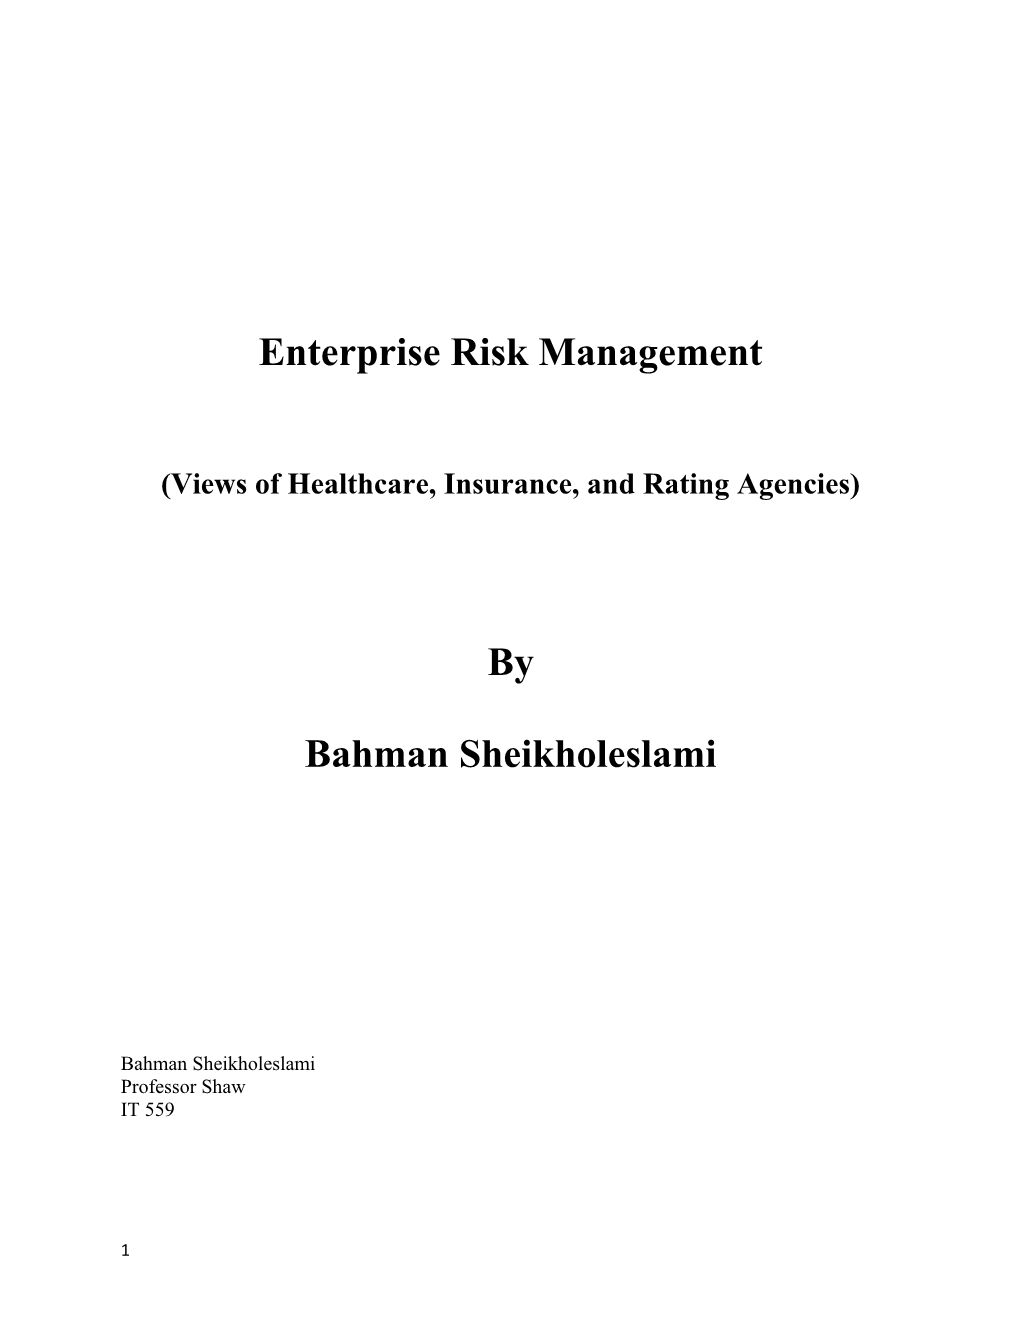 Views Ofhealthcare, Insurance, and Rating Agencies